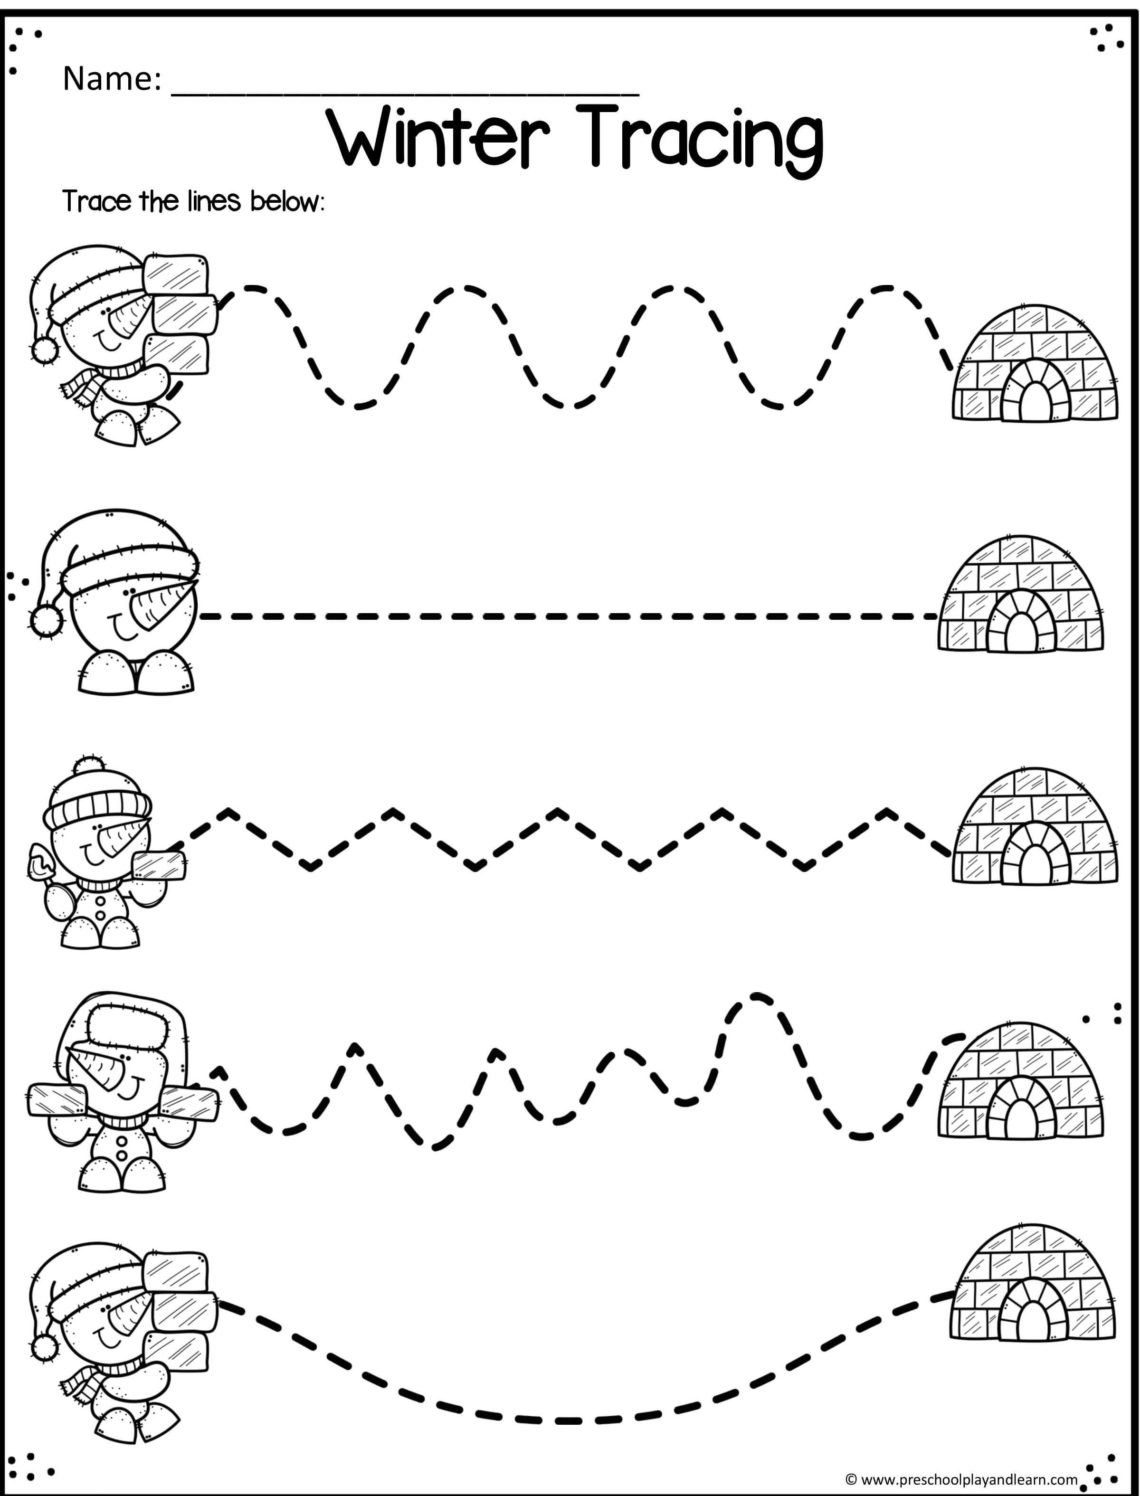 winter-tracing-worksheets